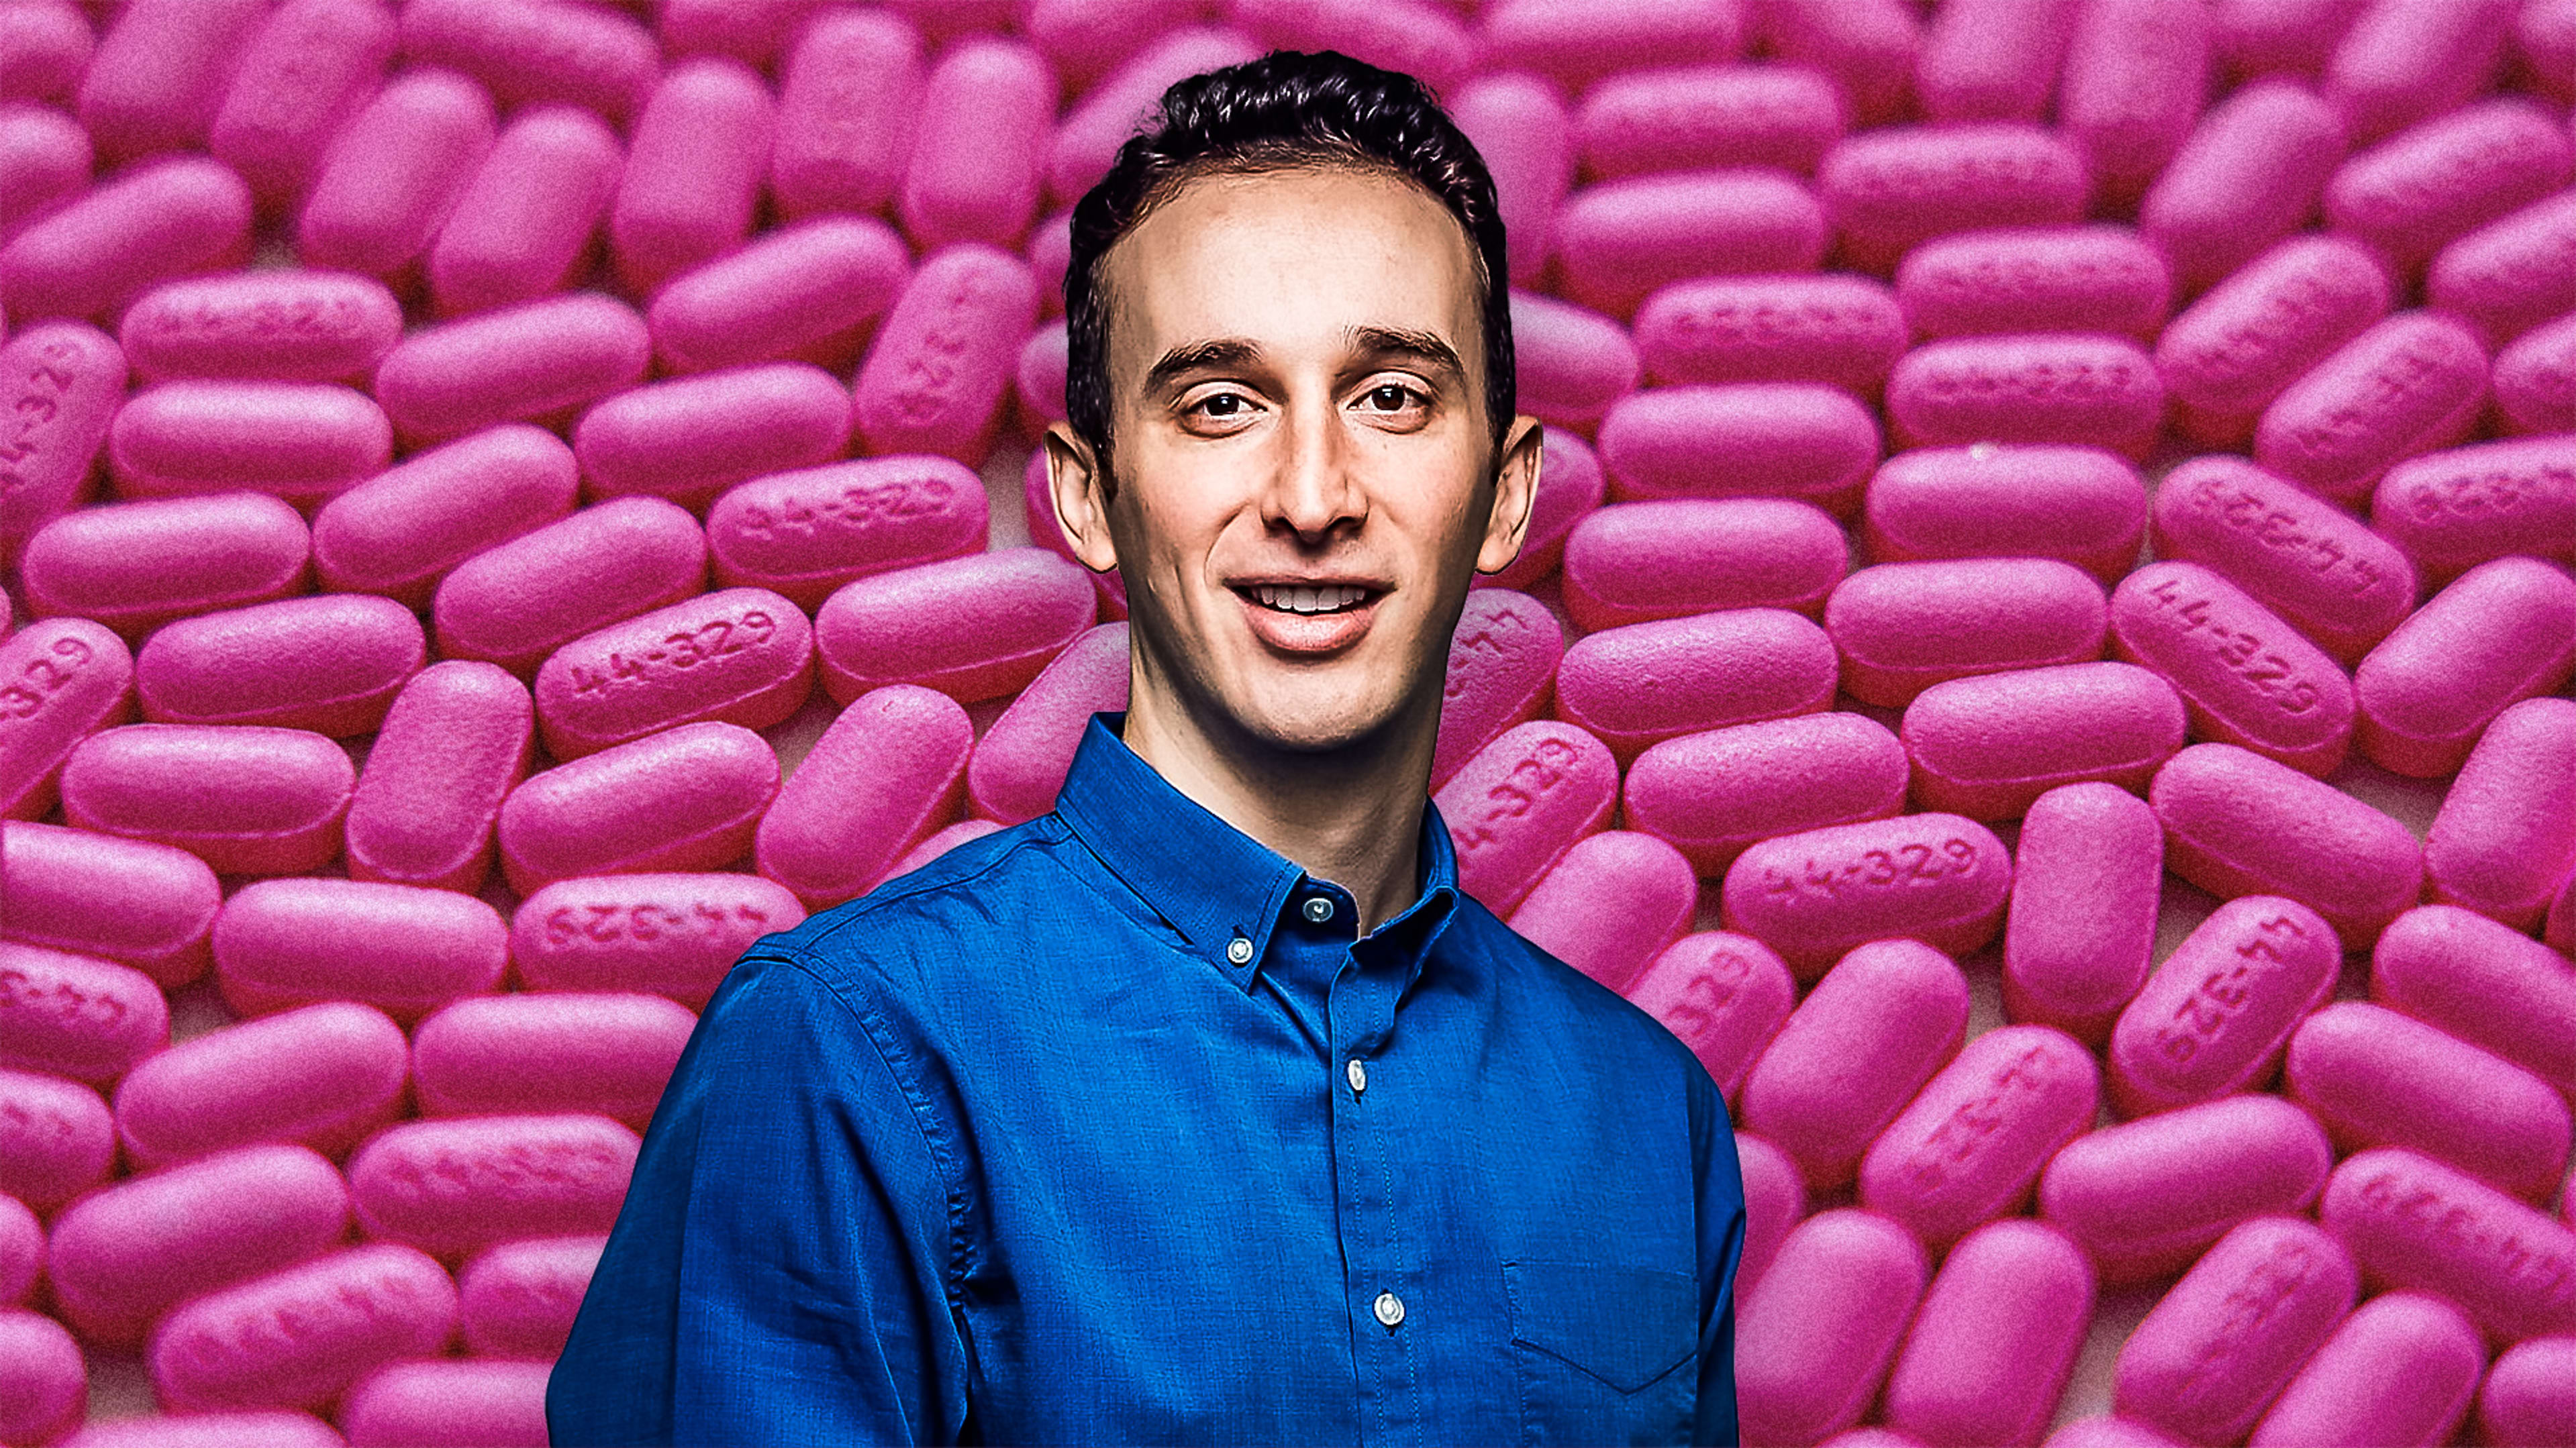 This startup just raised more than half a billion dollars to change how new drugs get discovered